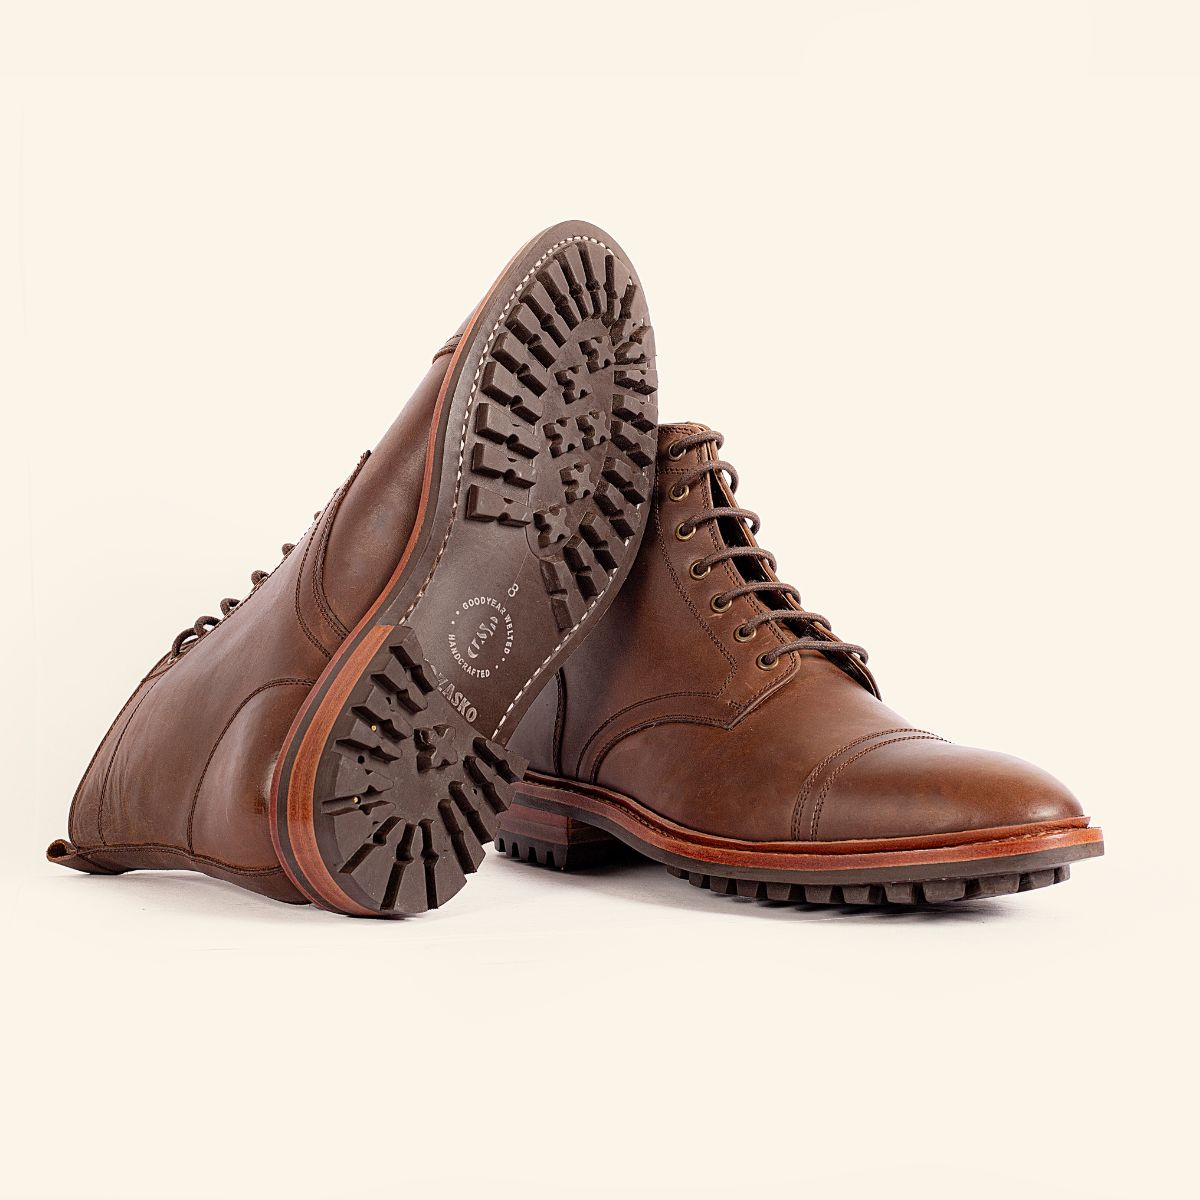 Goodywear welted brown captoe boot in oil pull up leather